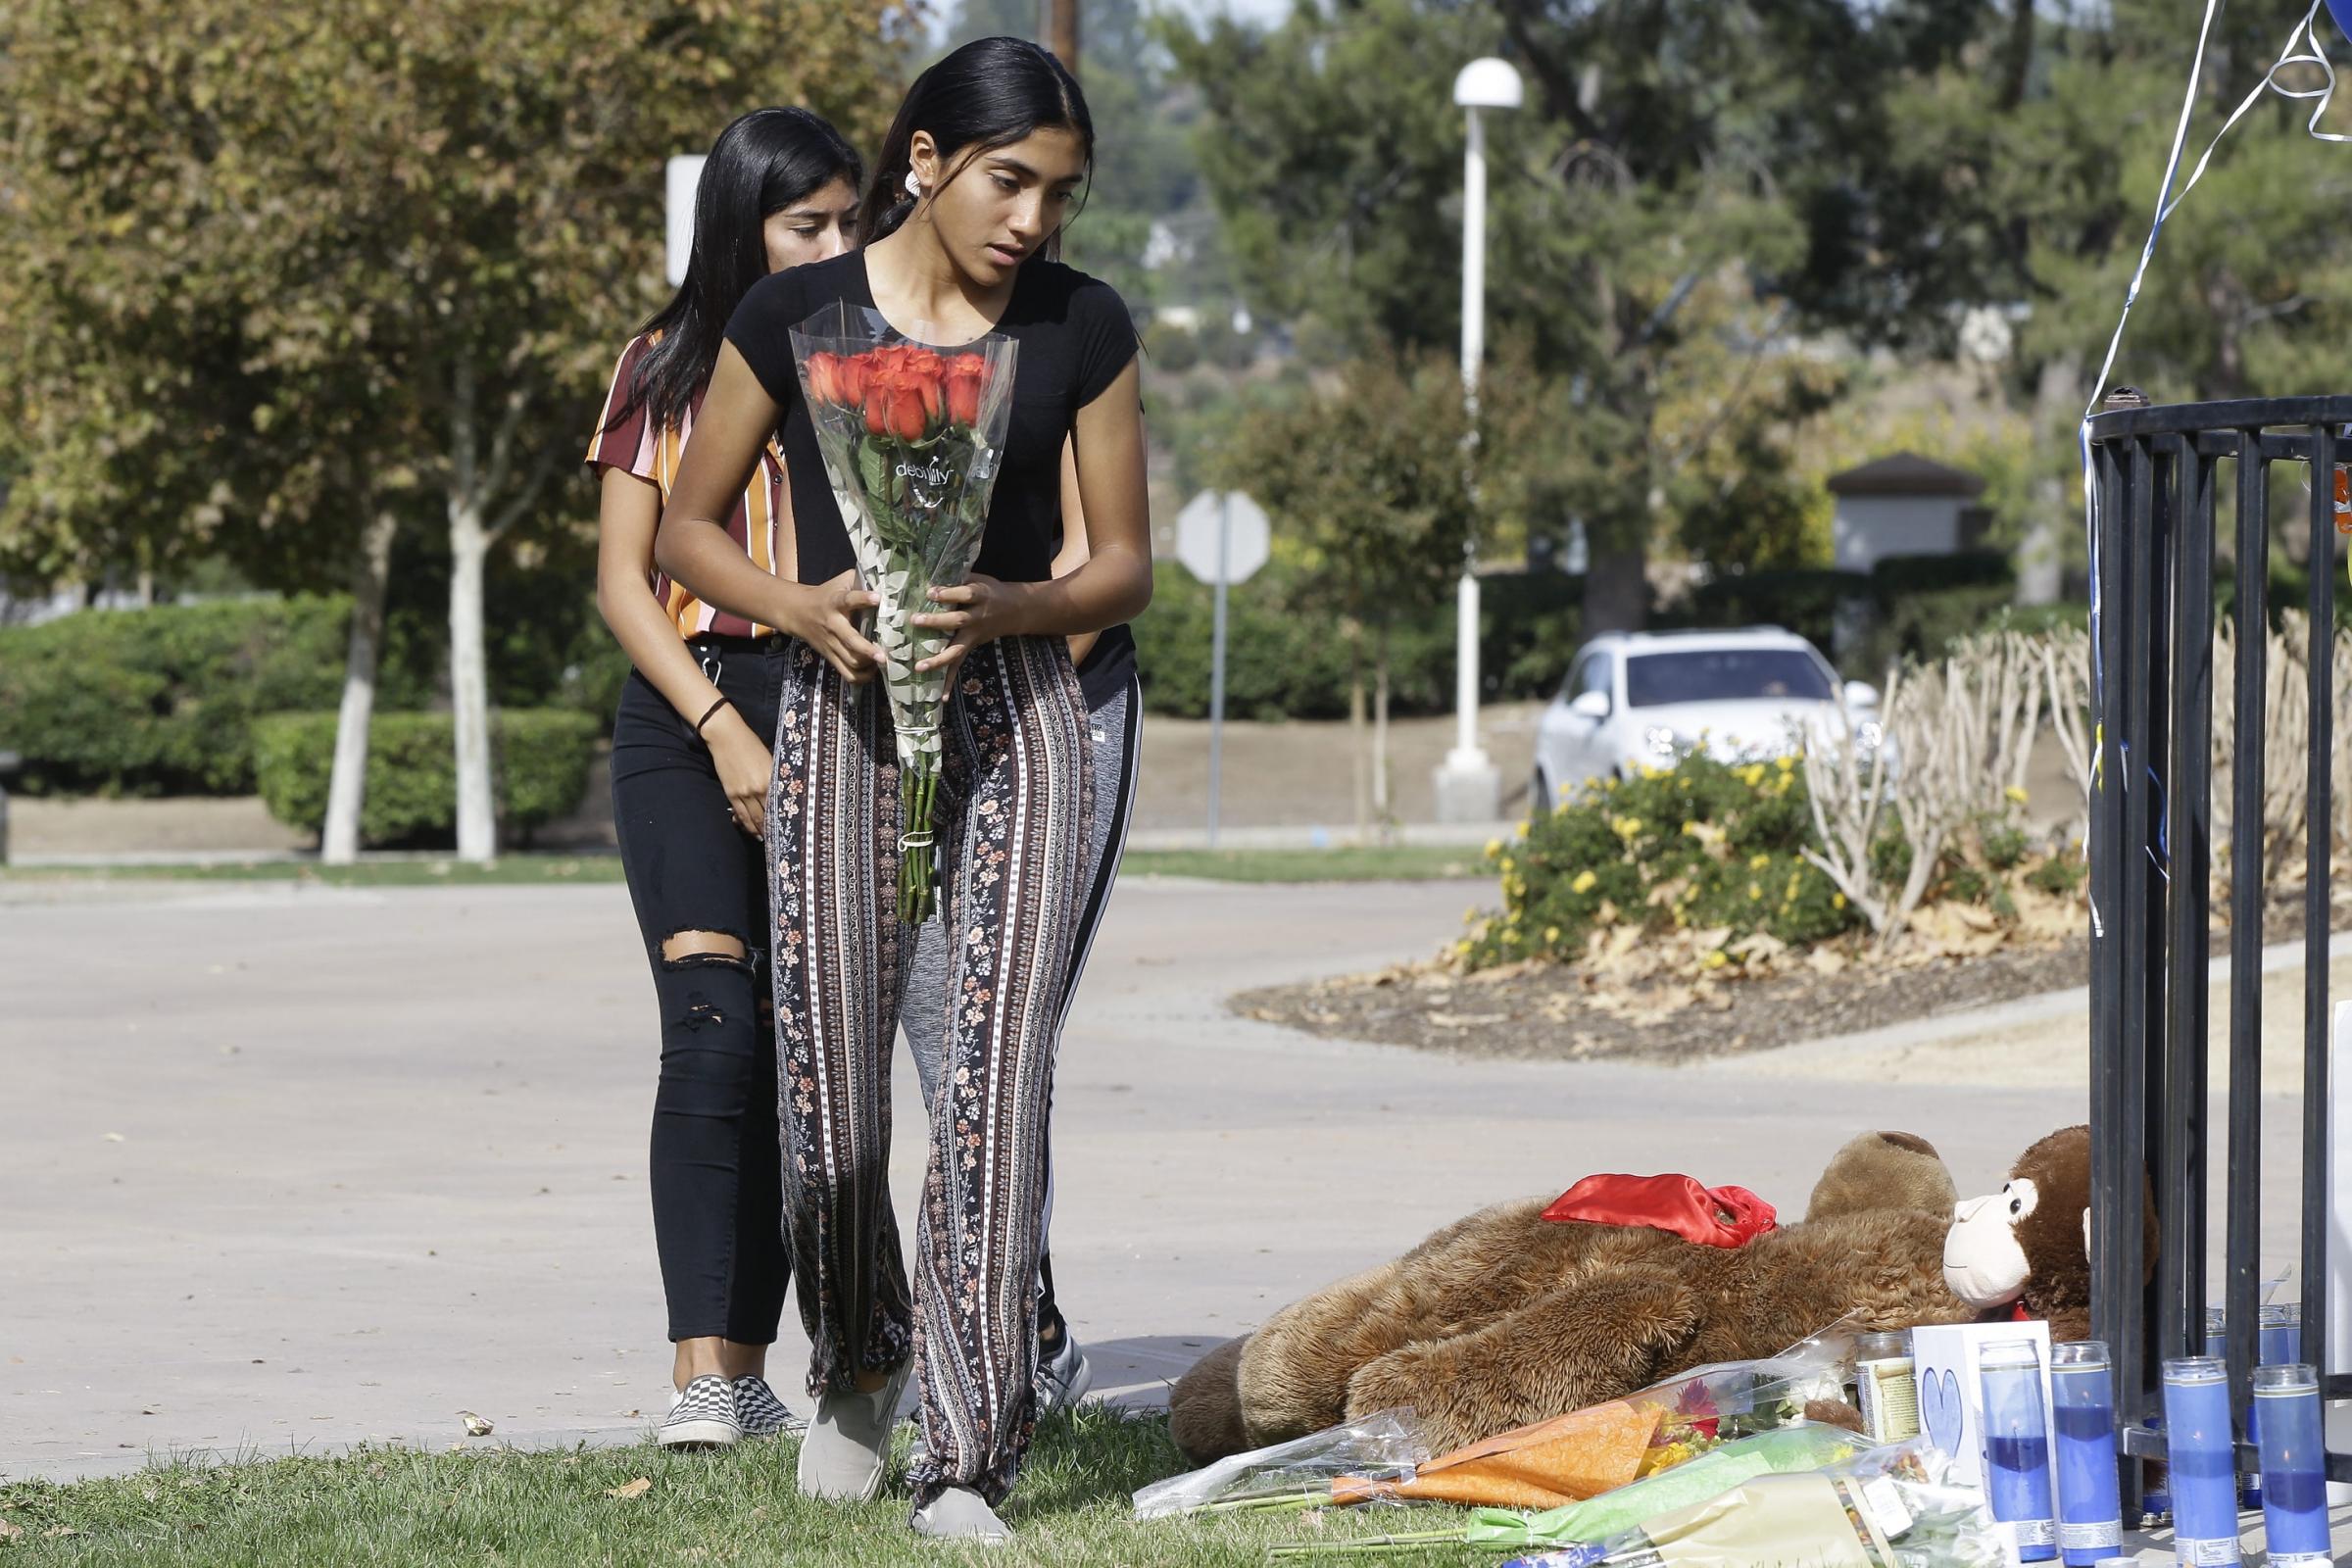 Vigil to be held for victims of California school shooting - The Bolton News